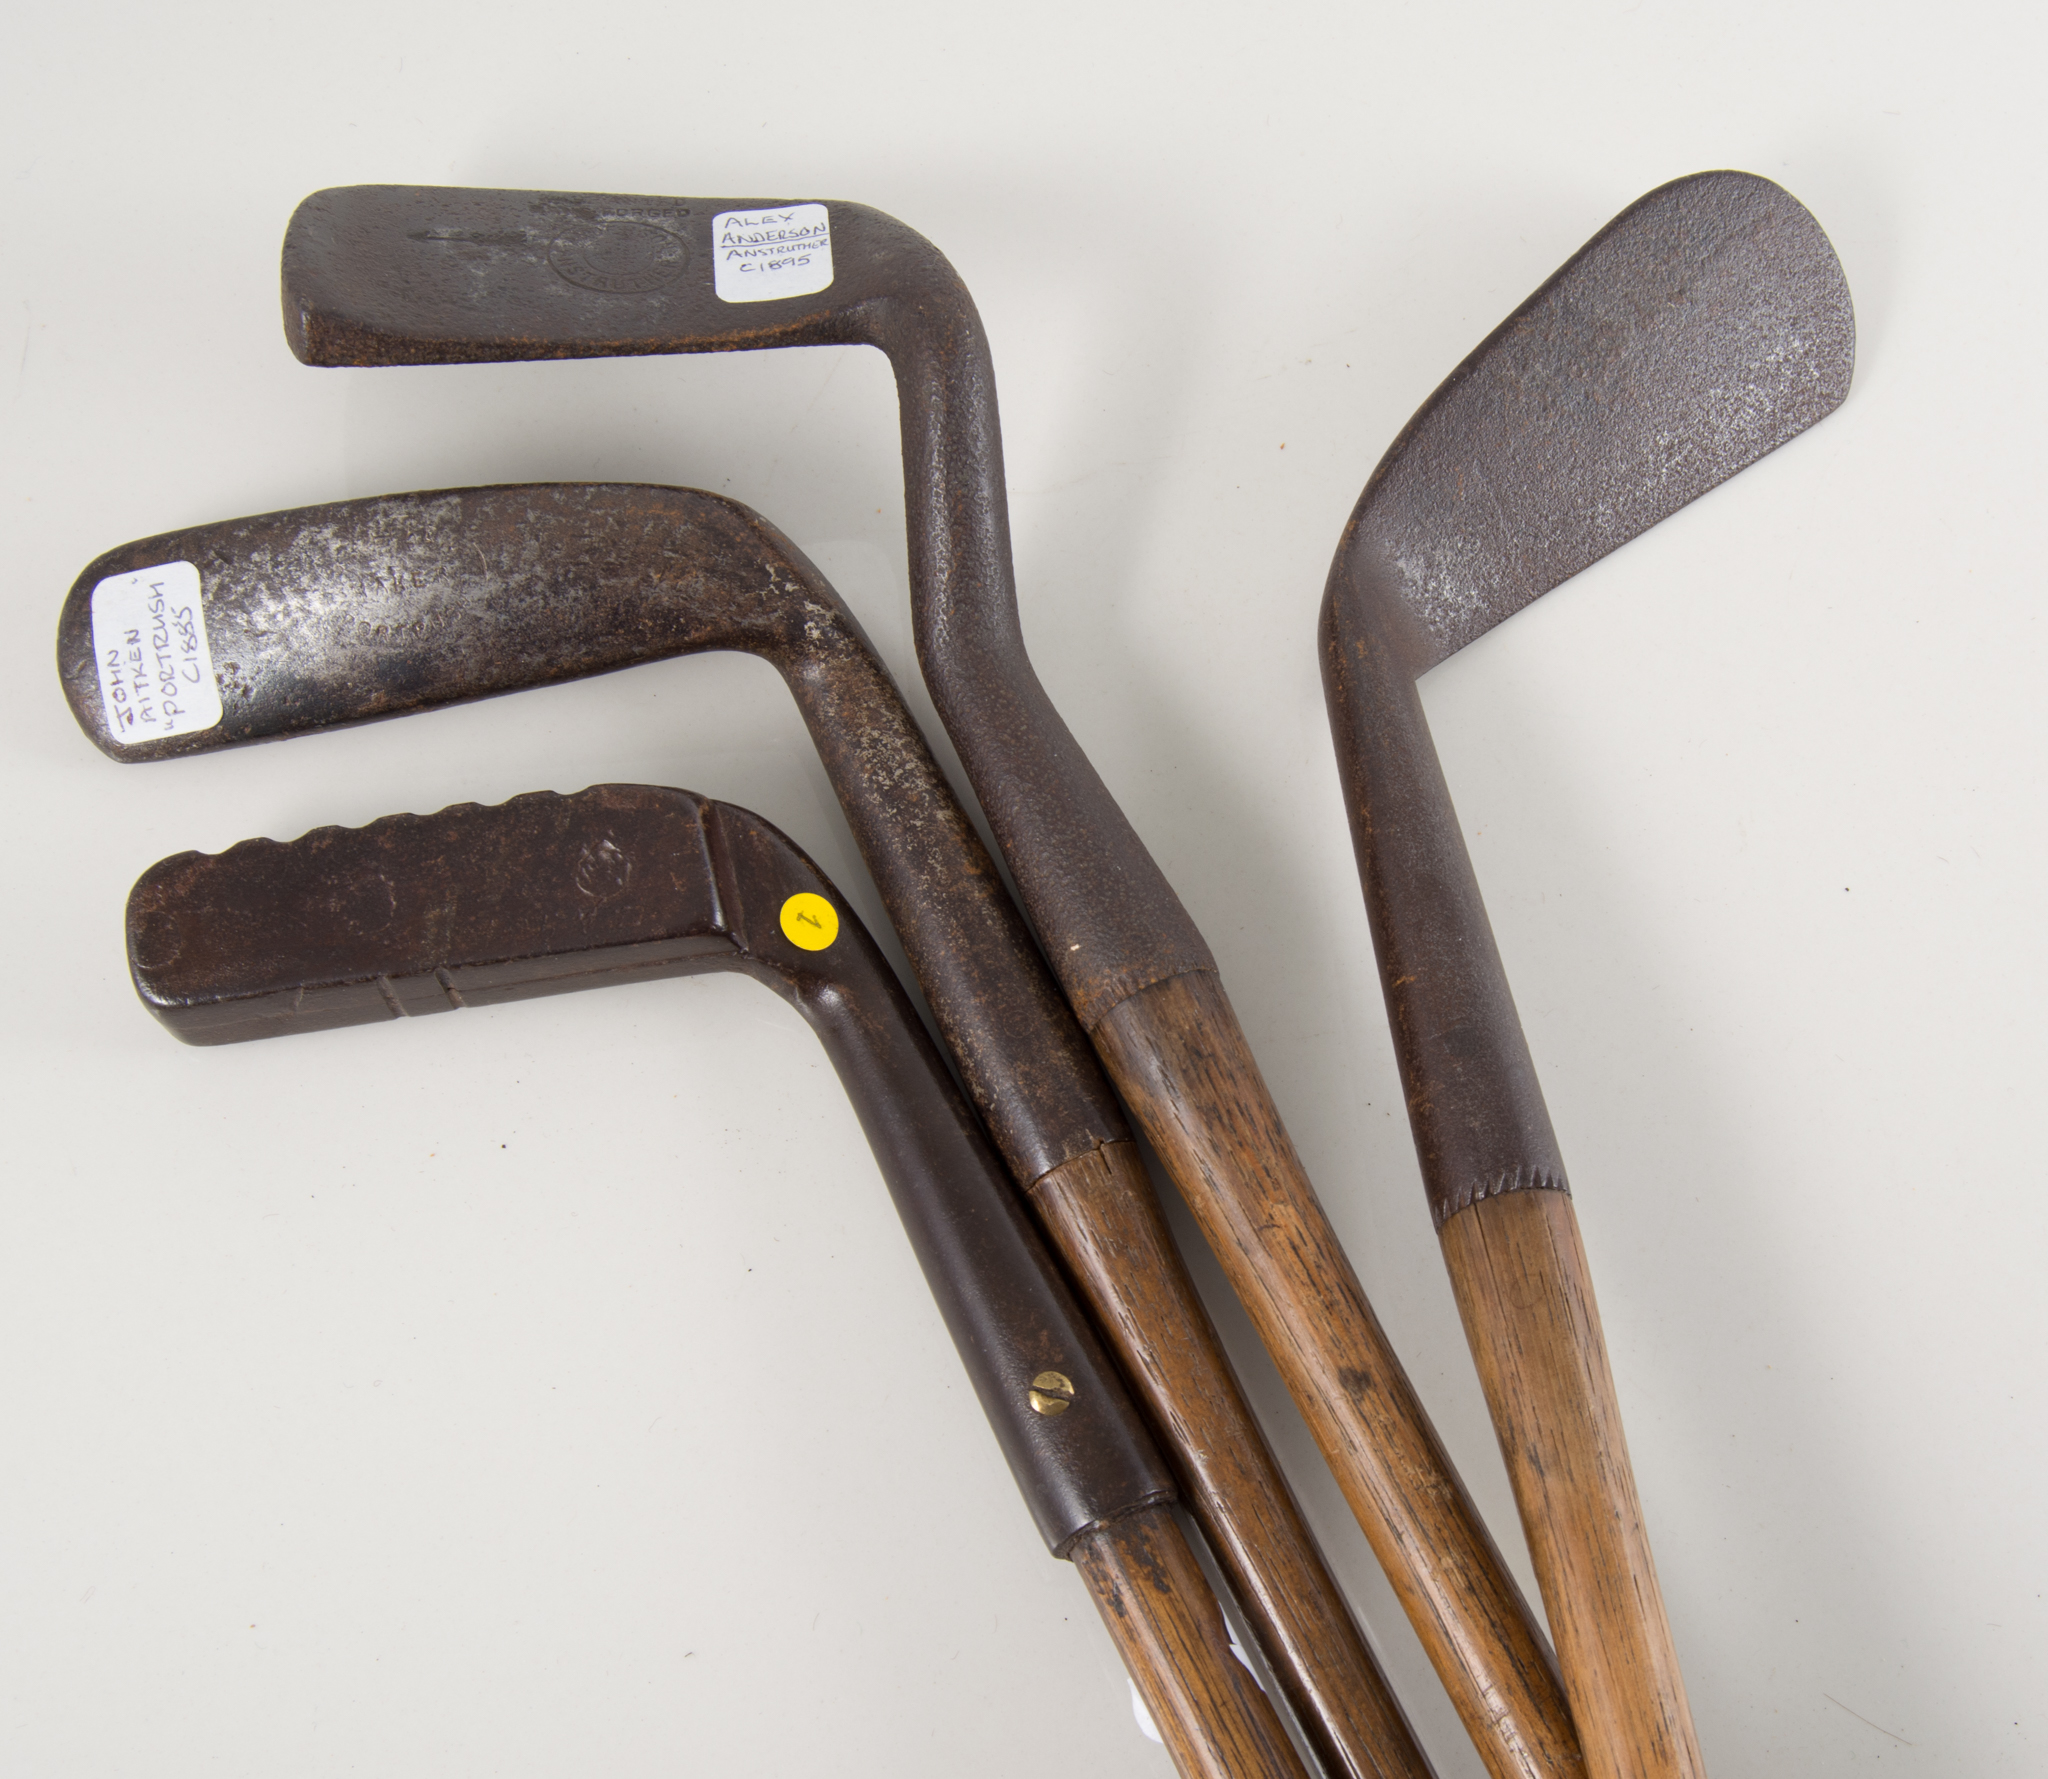 Four vintage hickory shafted golf clubs - an antique hand forged putter with square head and